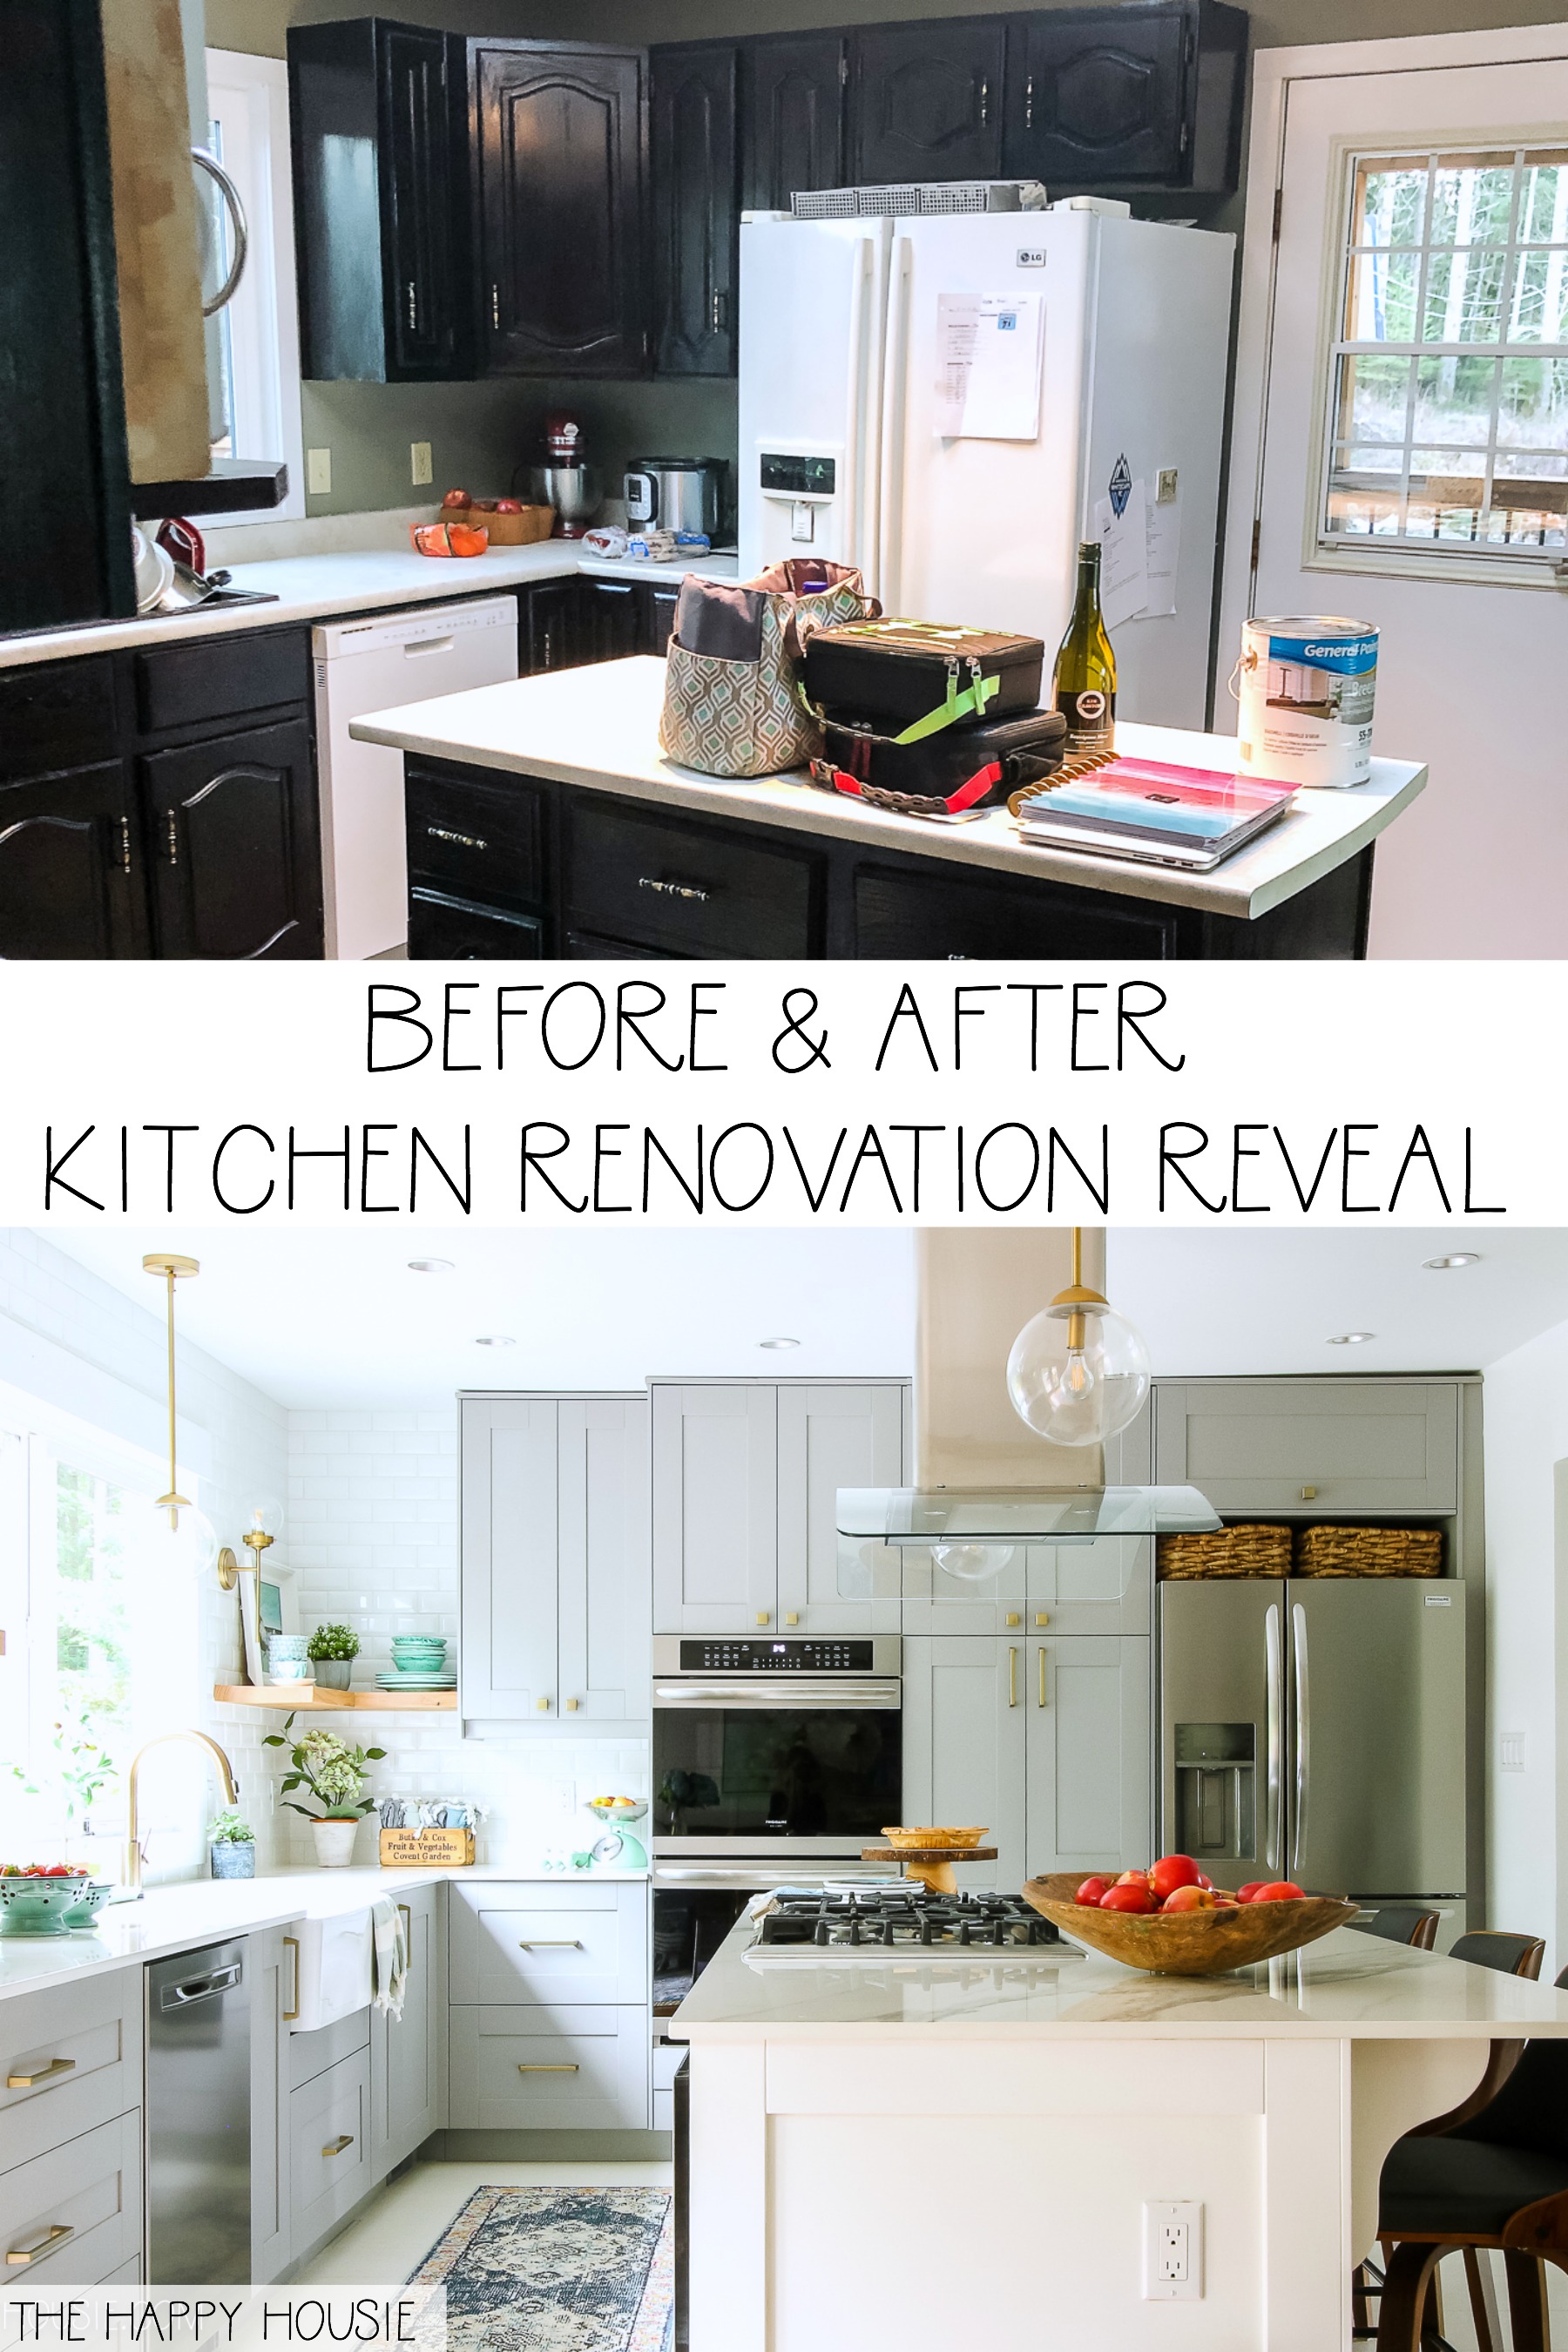 Before and After Kitchen Renovation Reveal poster.